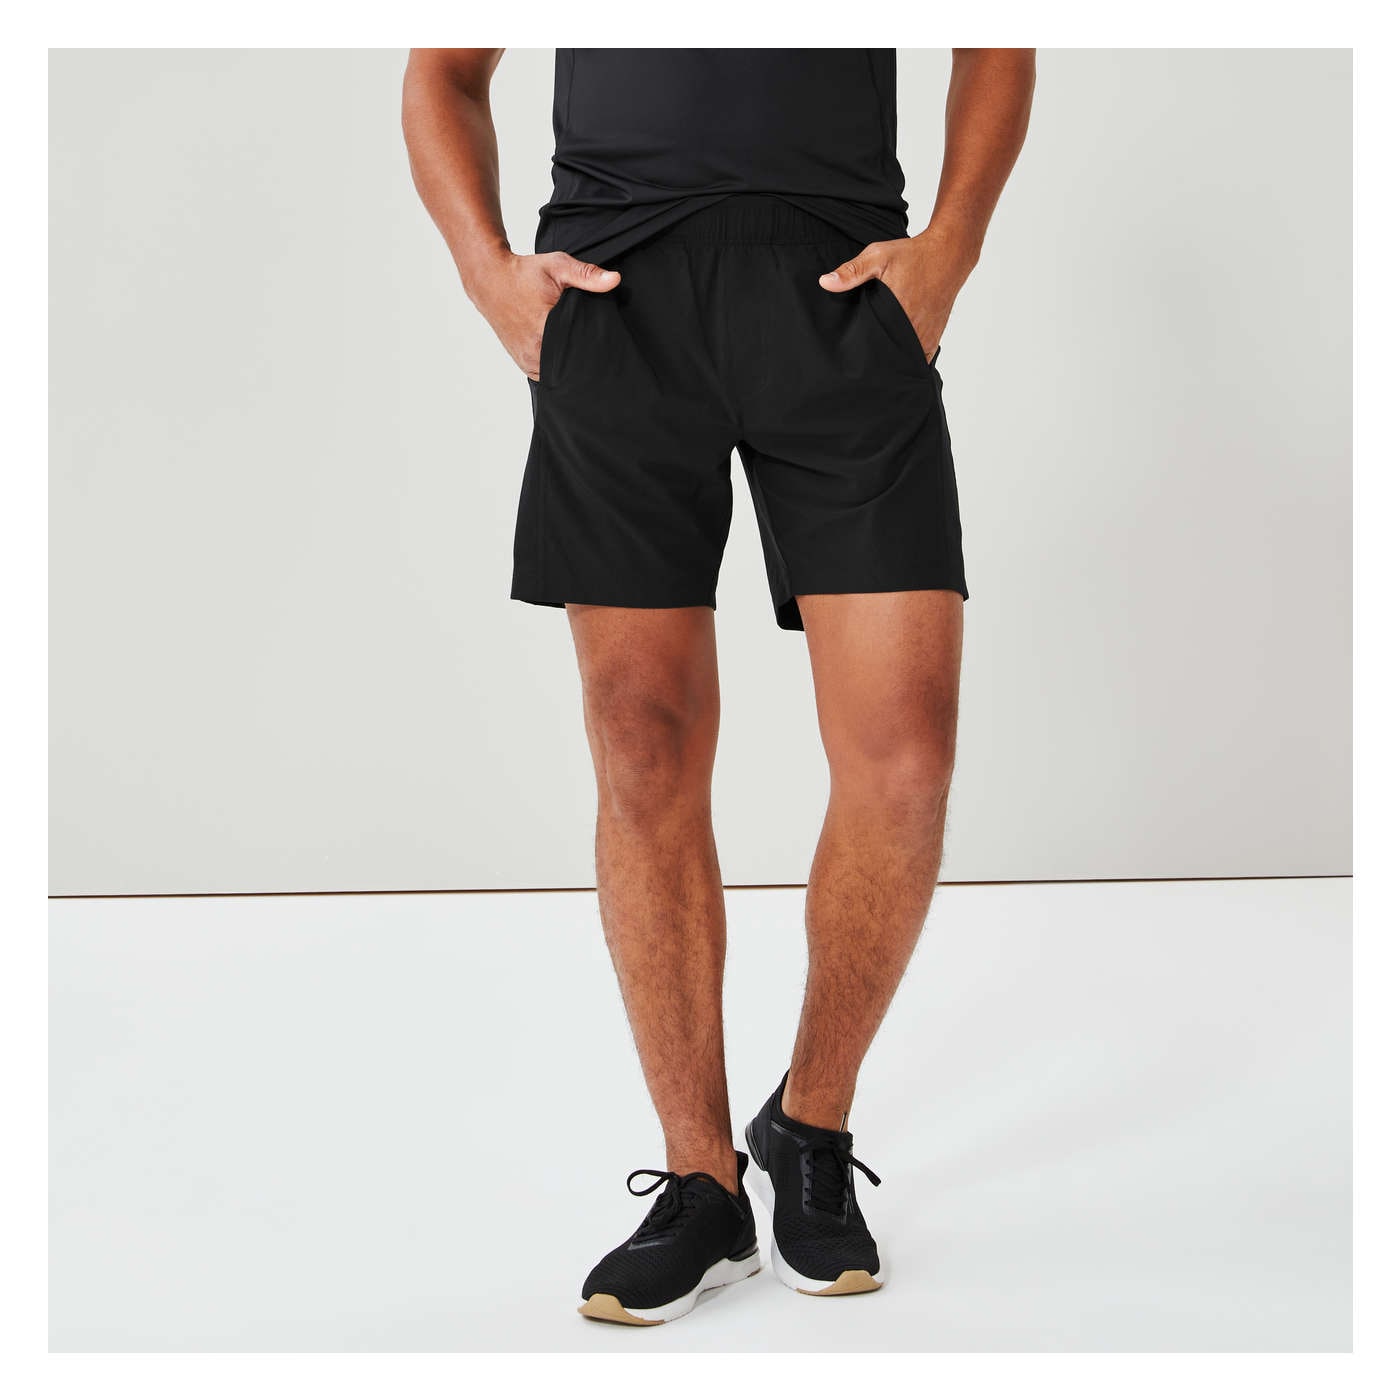 Shorts – Fore Active